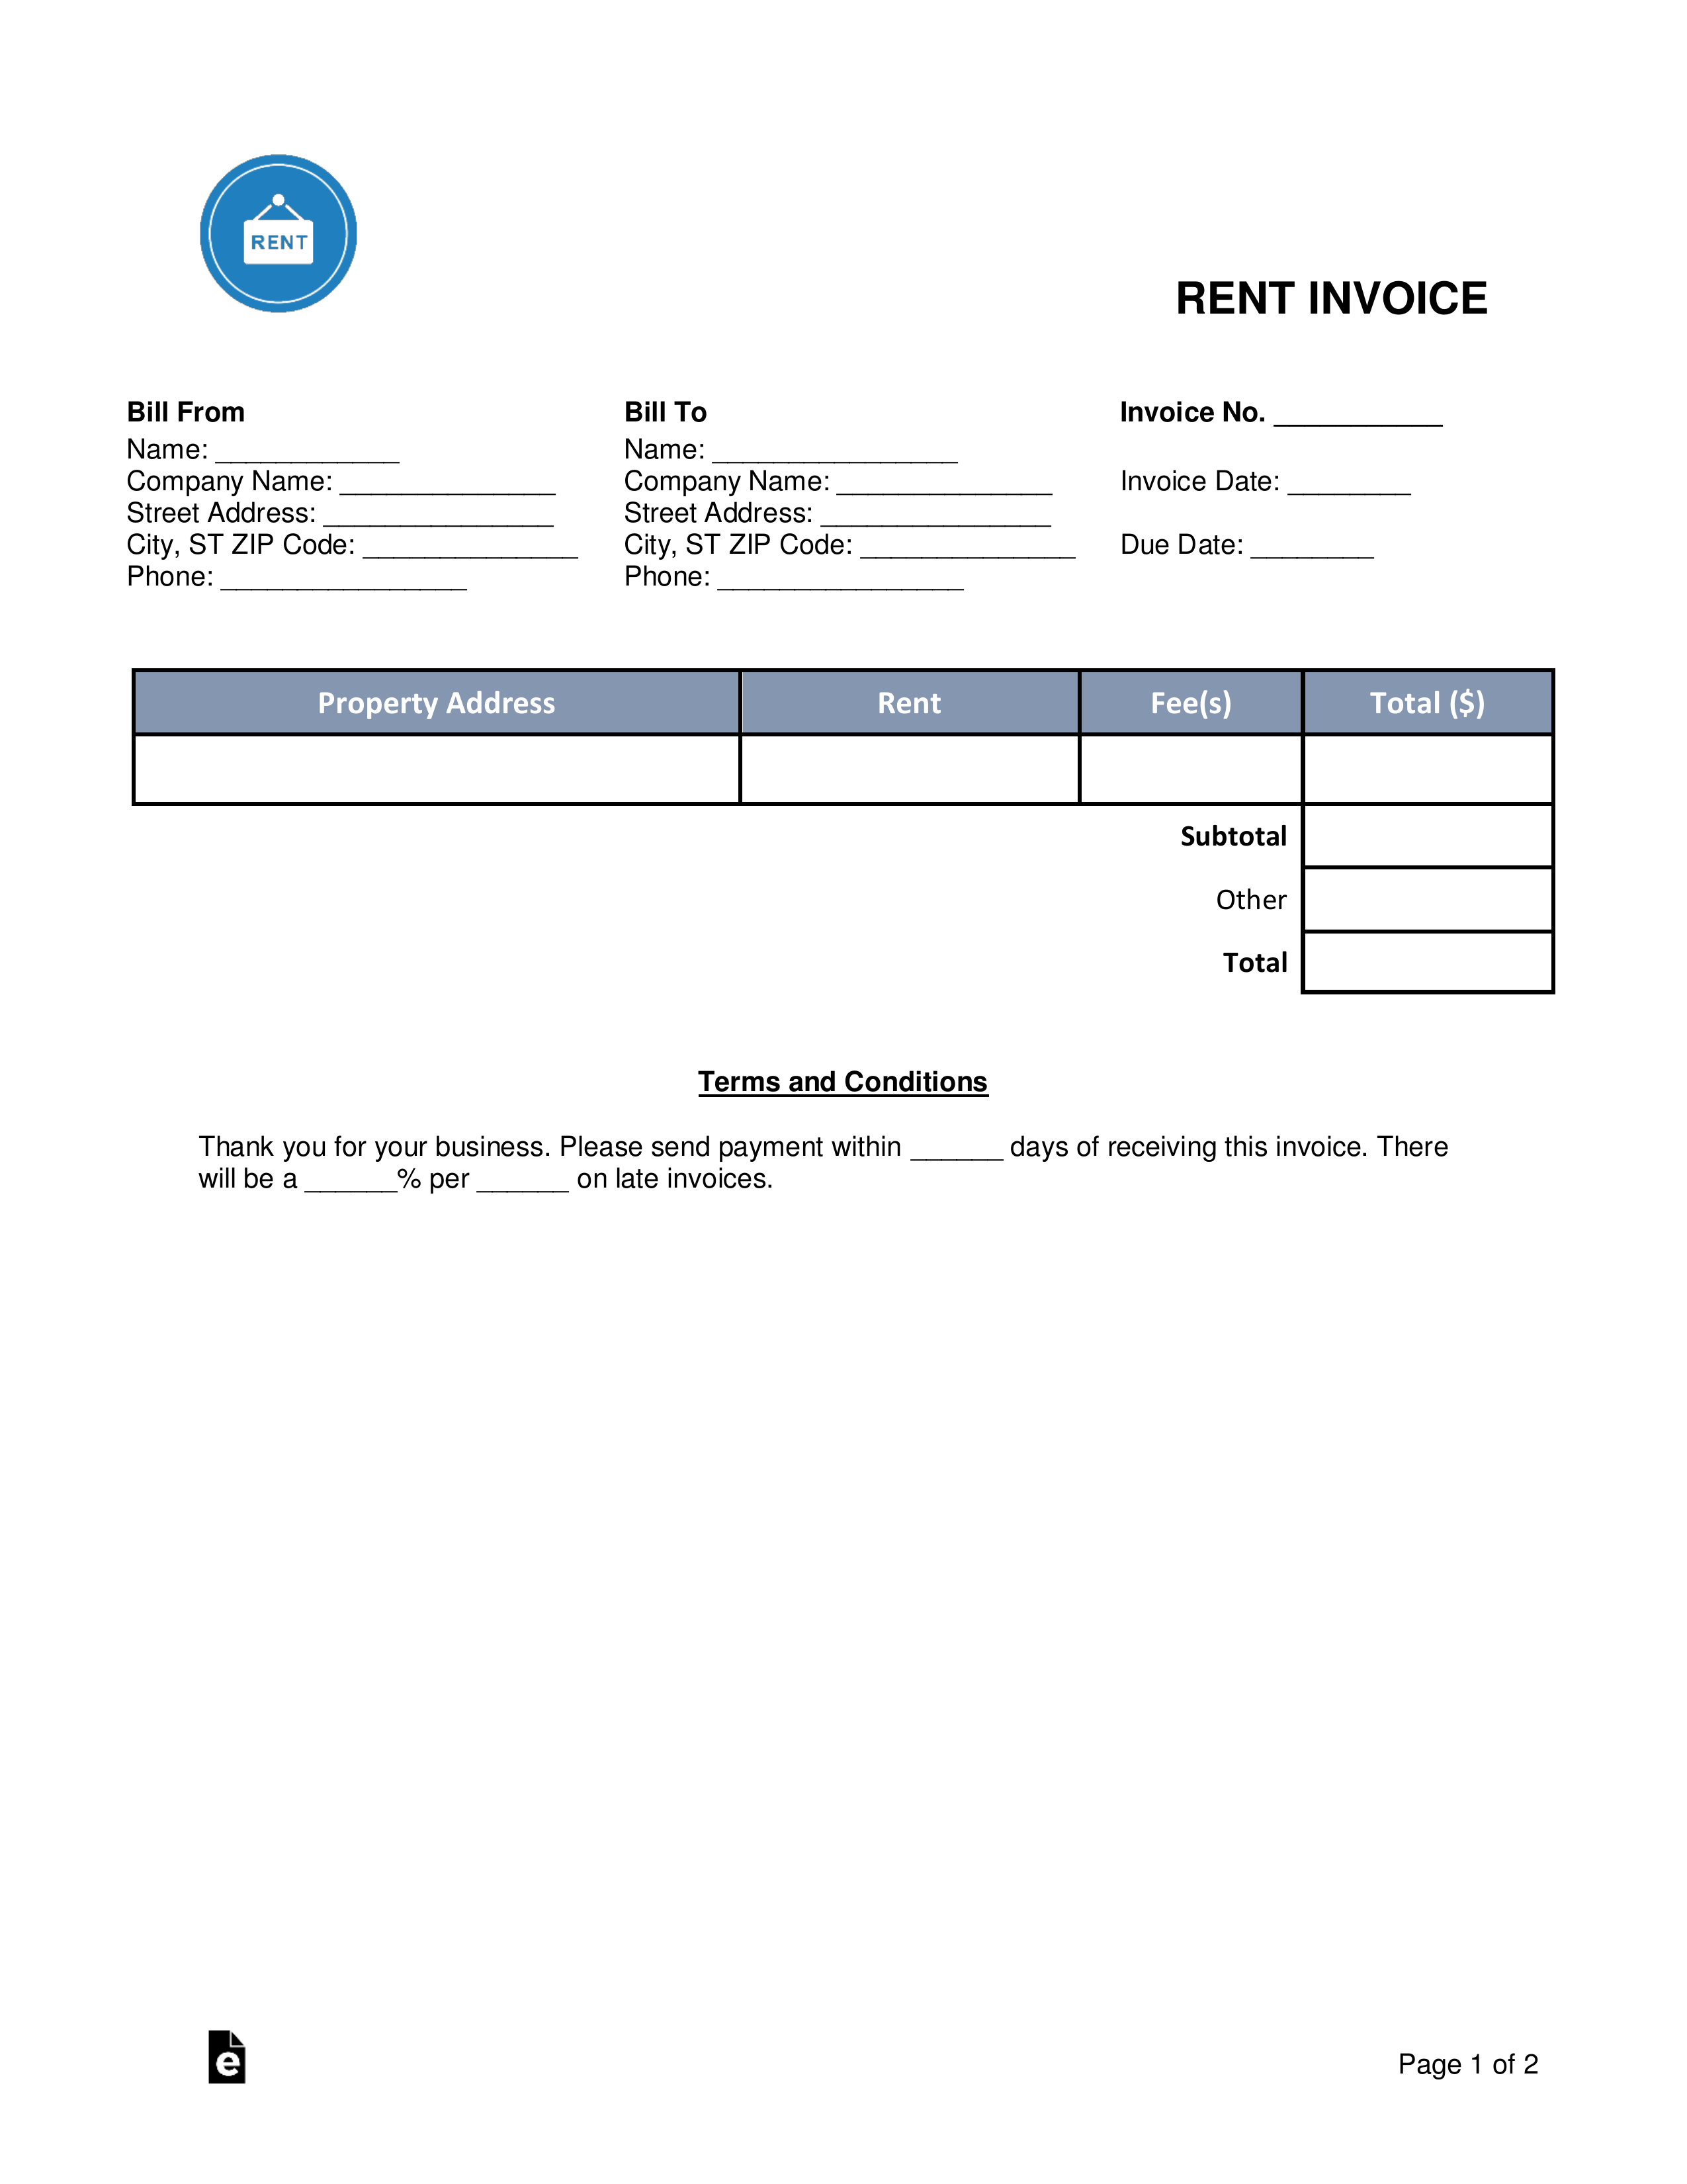 Rental (Monthly Rent) Invoice Template